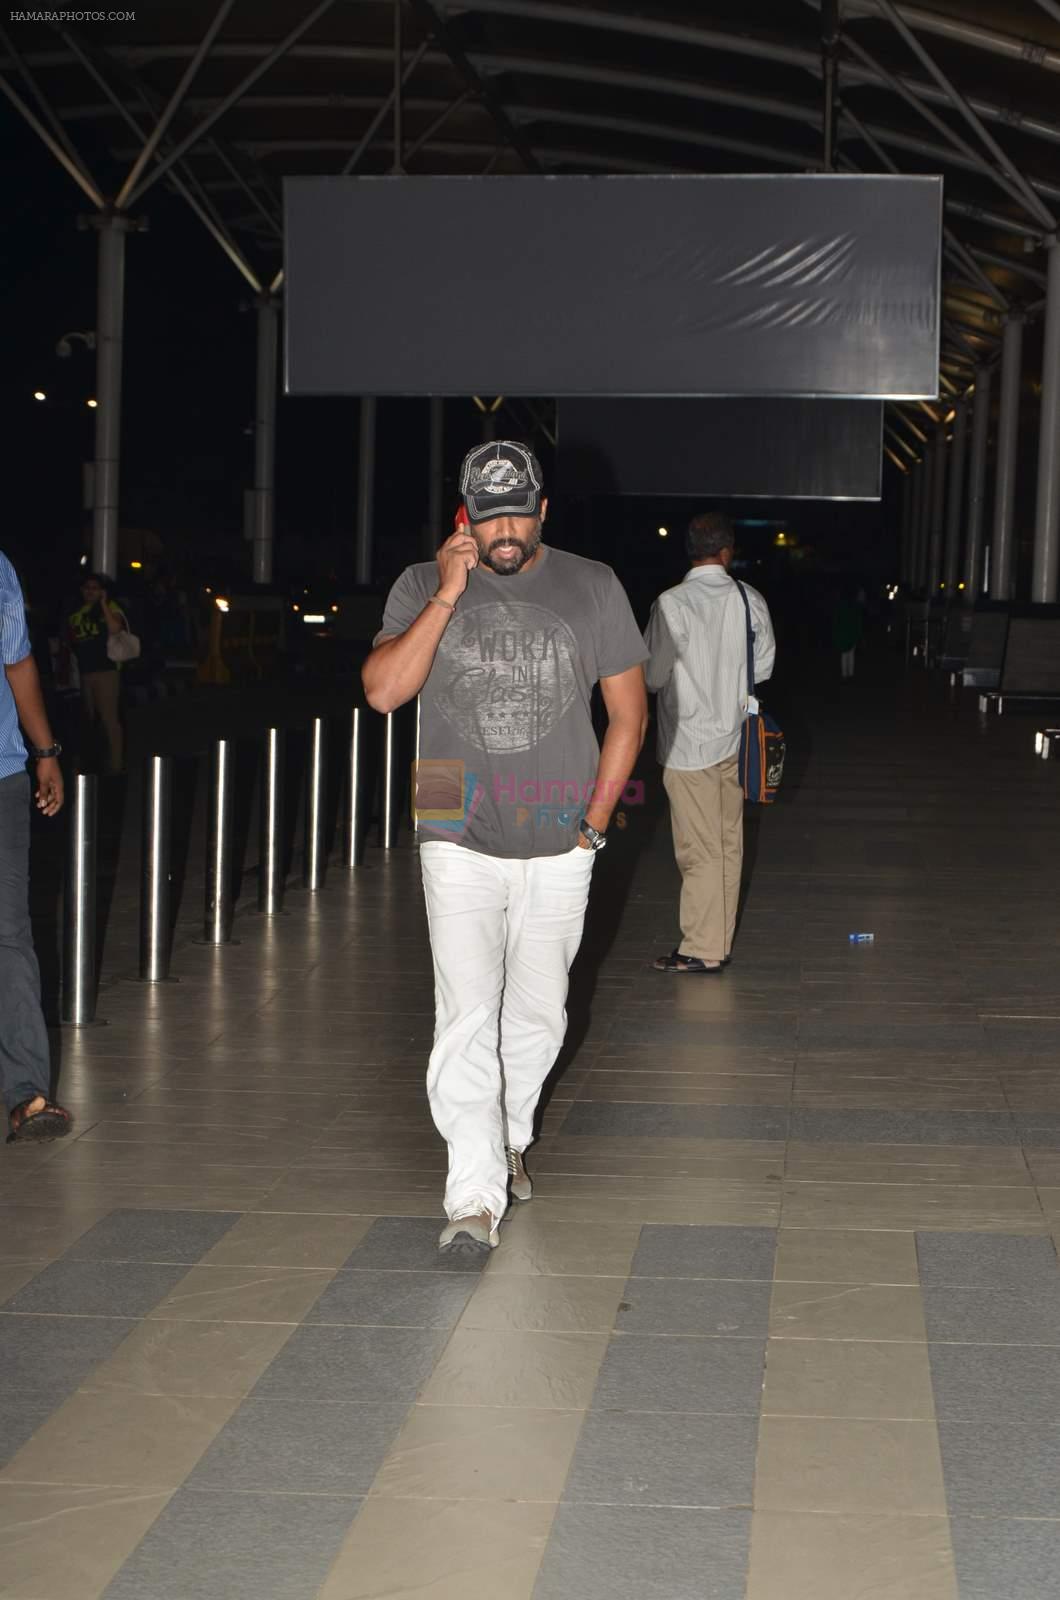 Madhavan snapped at the airport in Mumbai on 15th June 2015